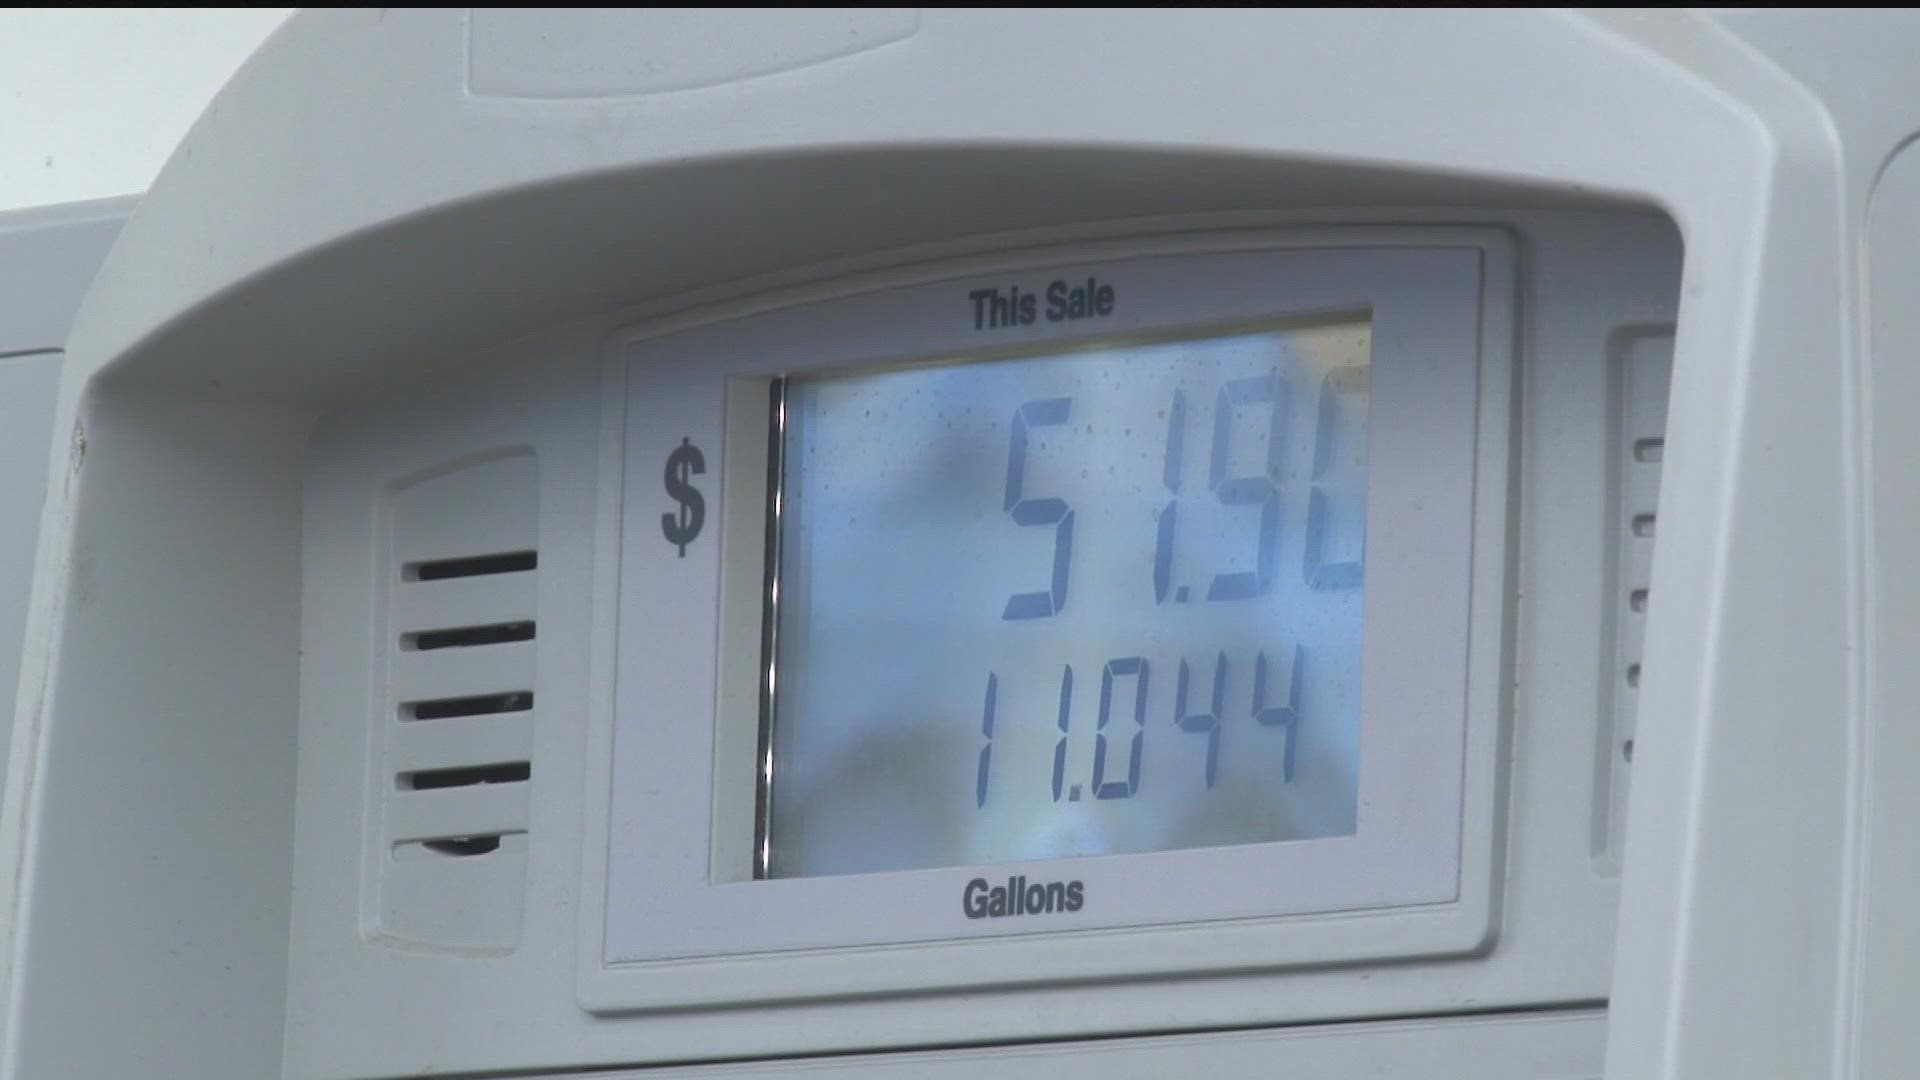 With the state sitting on a record surplus, some lawmakers are pitching a temporary gas tax holiday to ease rising costs at the pump.